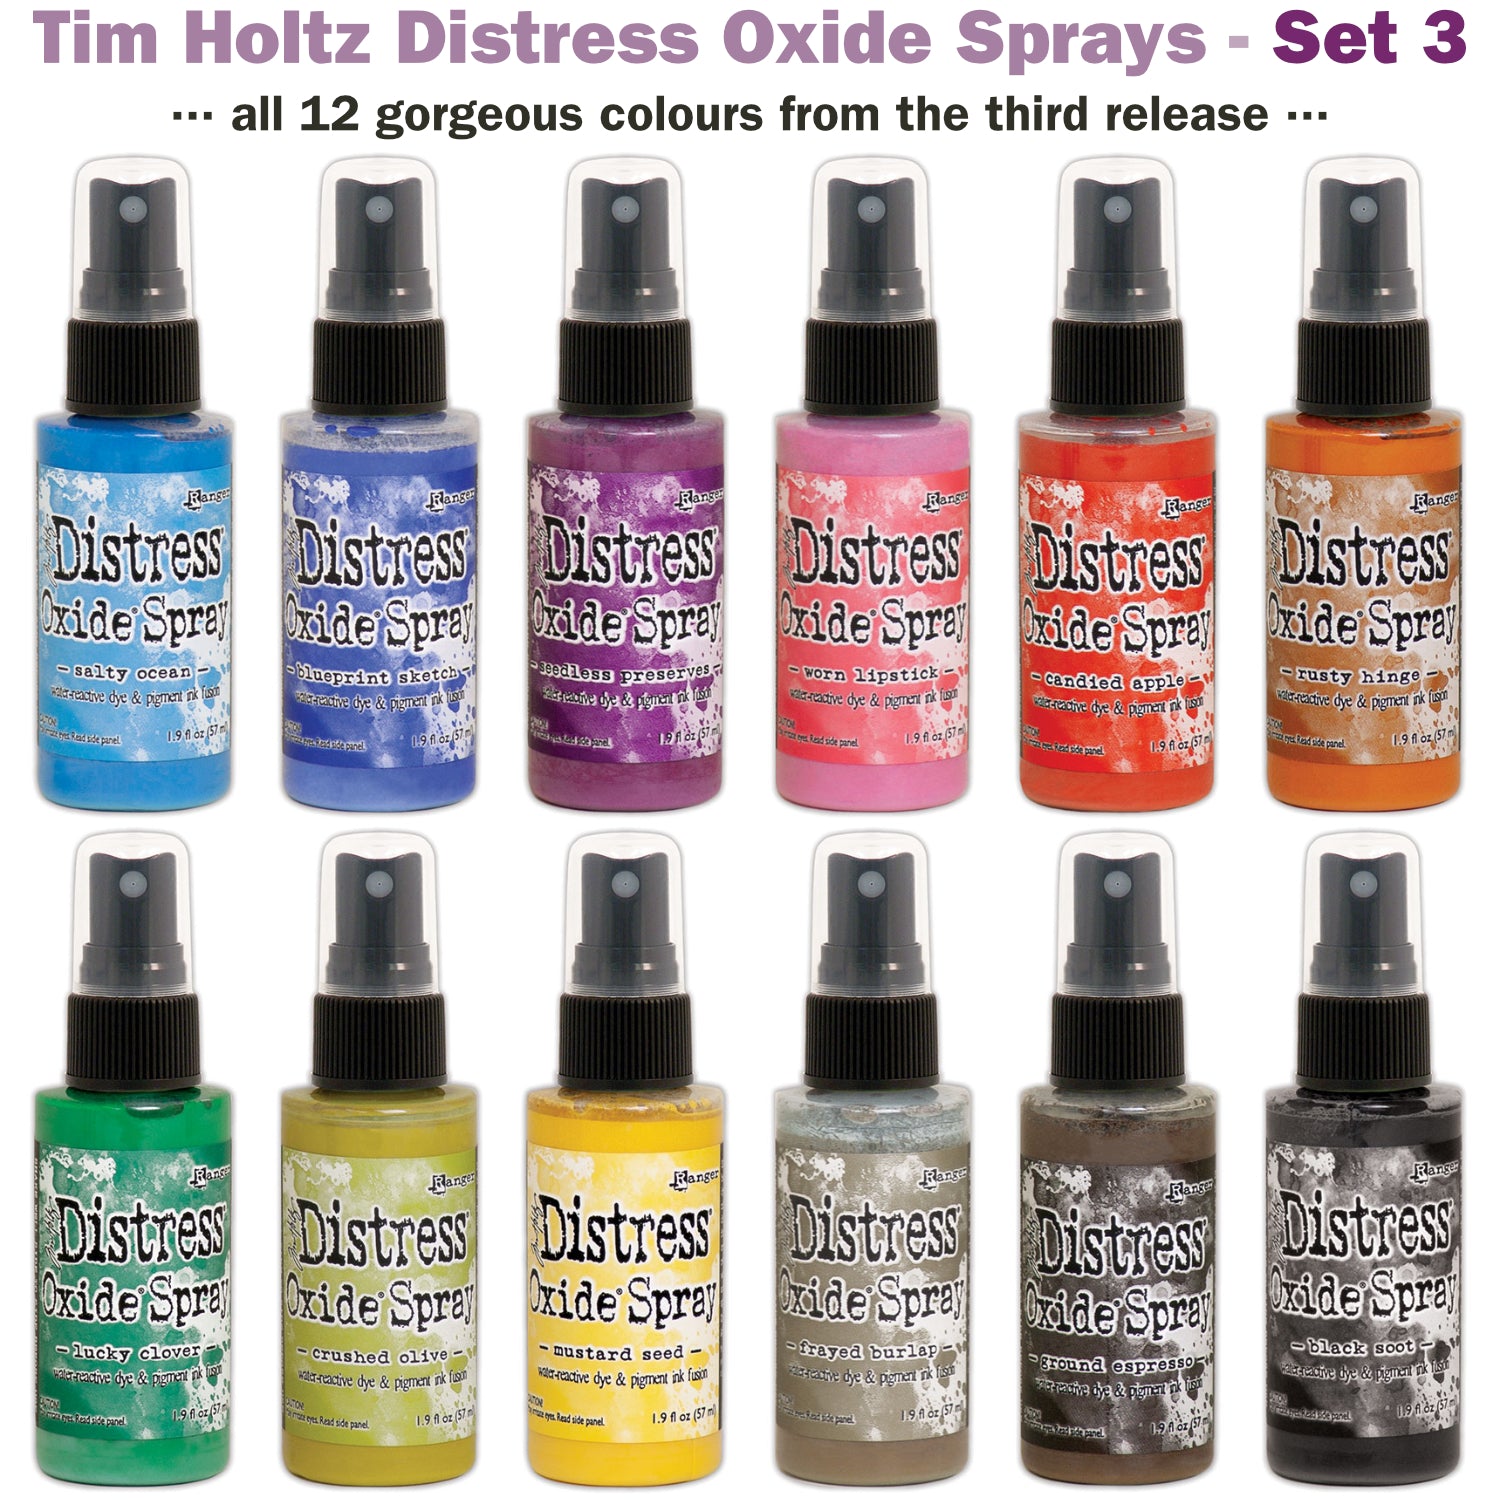 image showing Set 3 of the Distress Oxide Spray from Tim Holtz and Ranger, for sale at Art by Jenny in Australia 